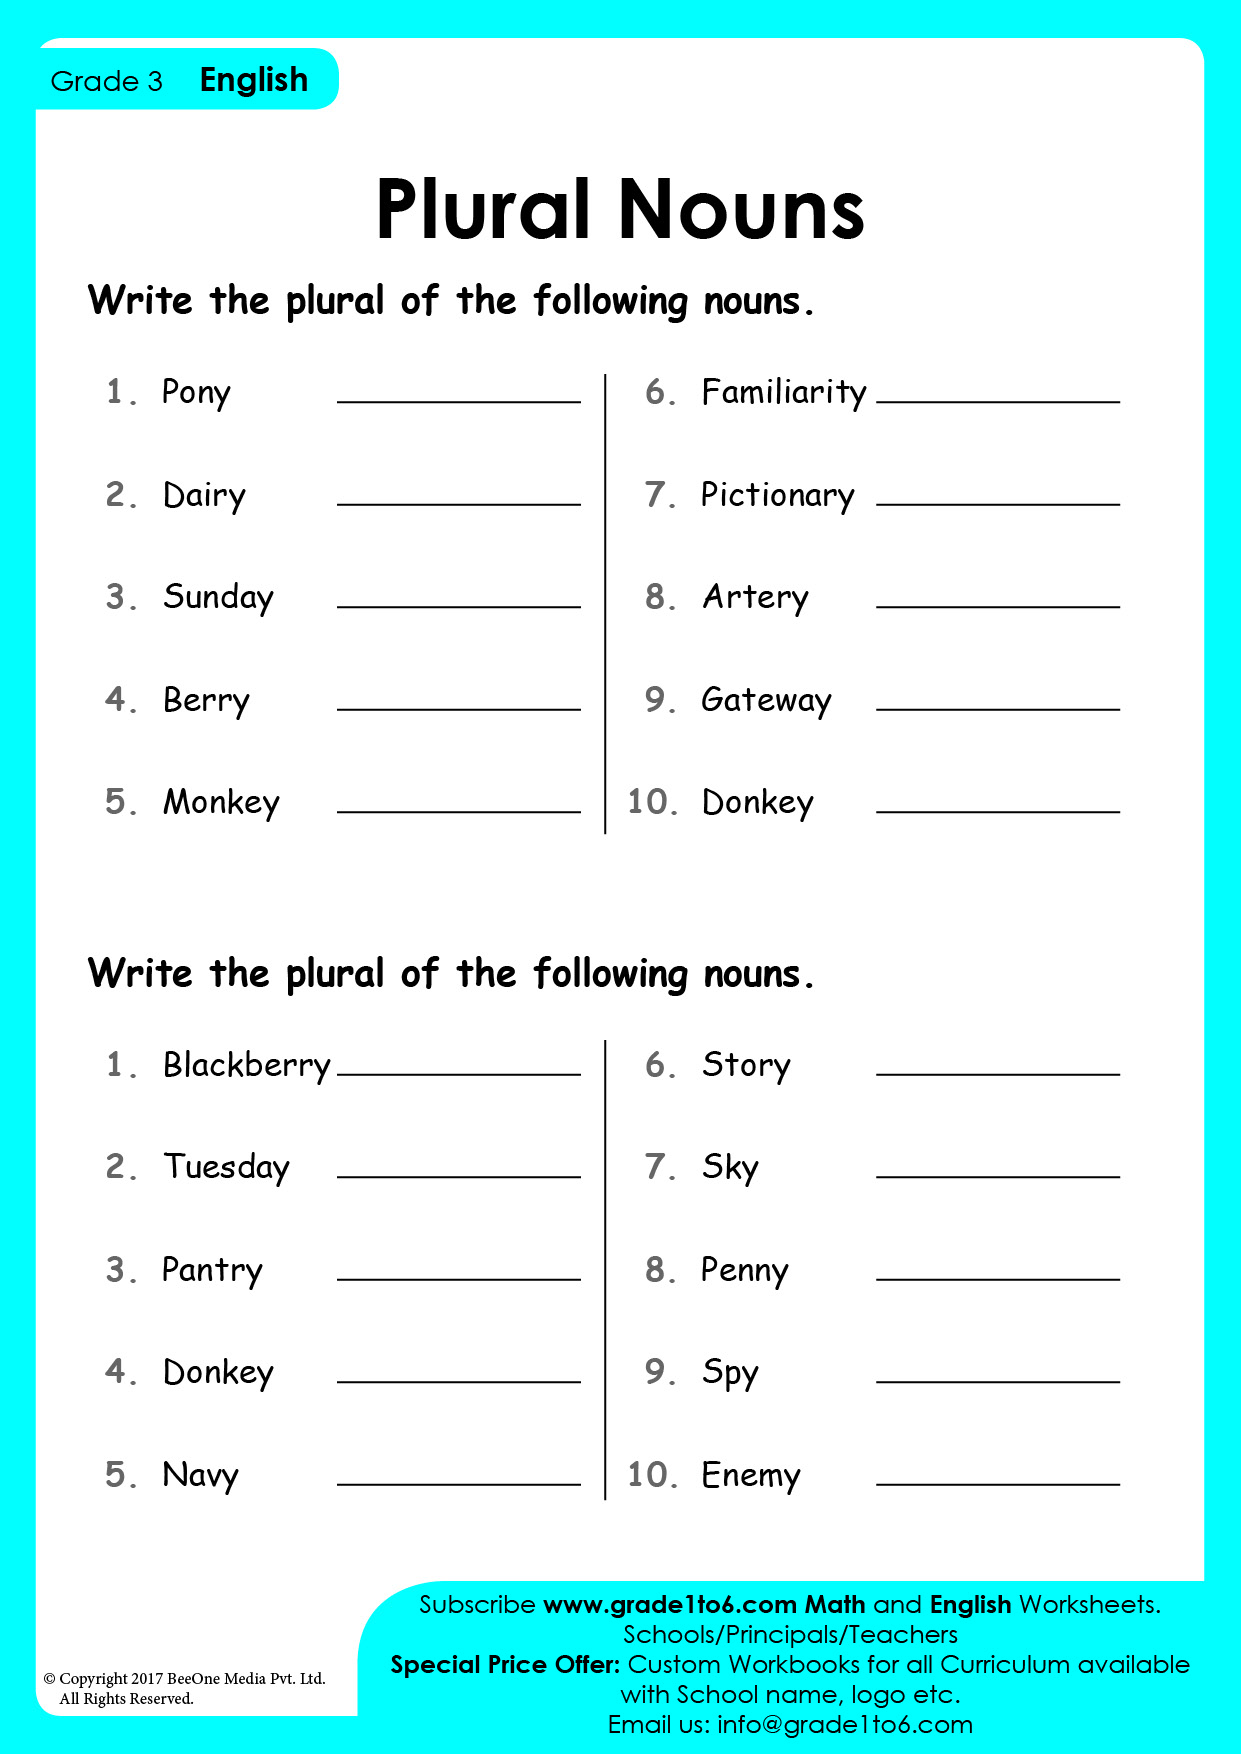 plural-nouns-adding-s-es-and-ies-worksheet